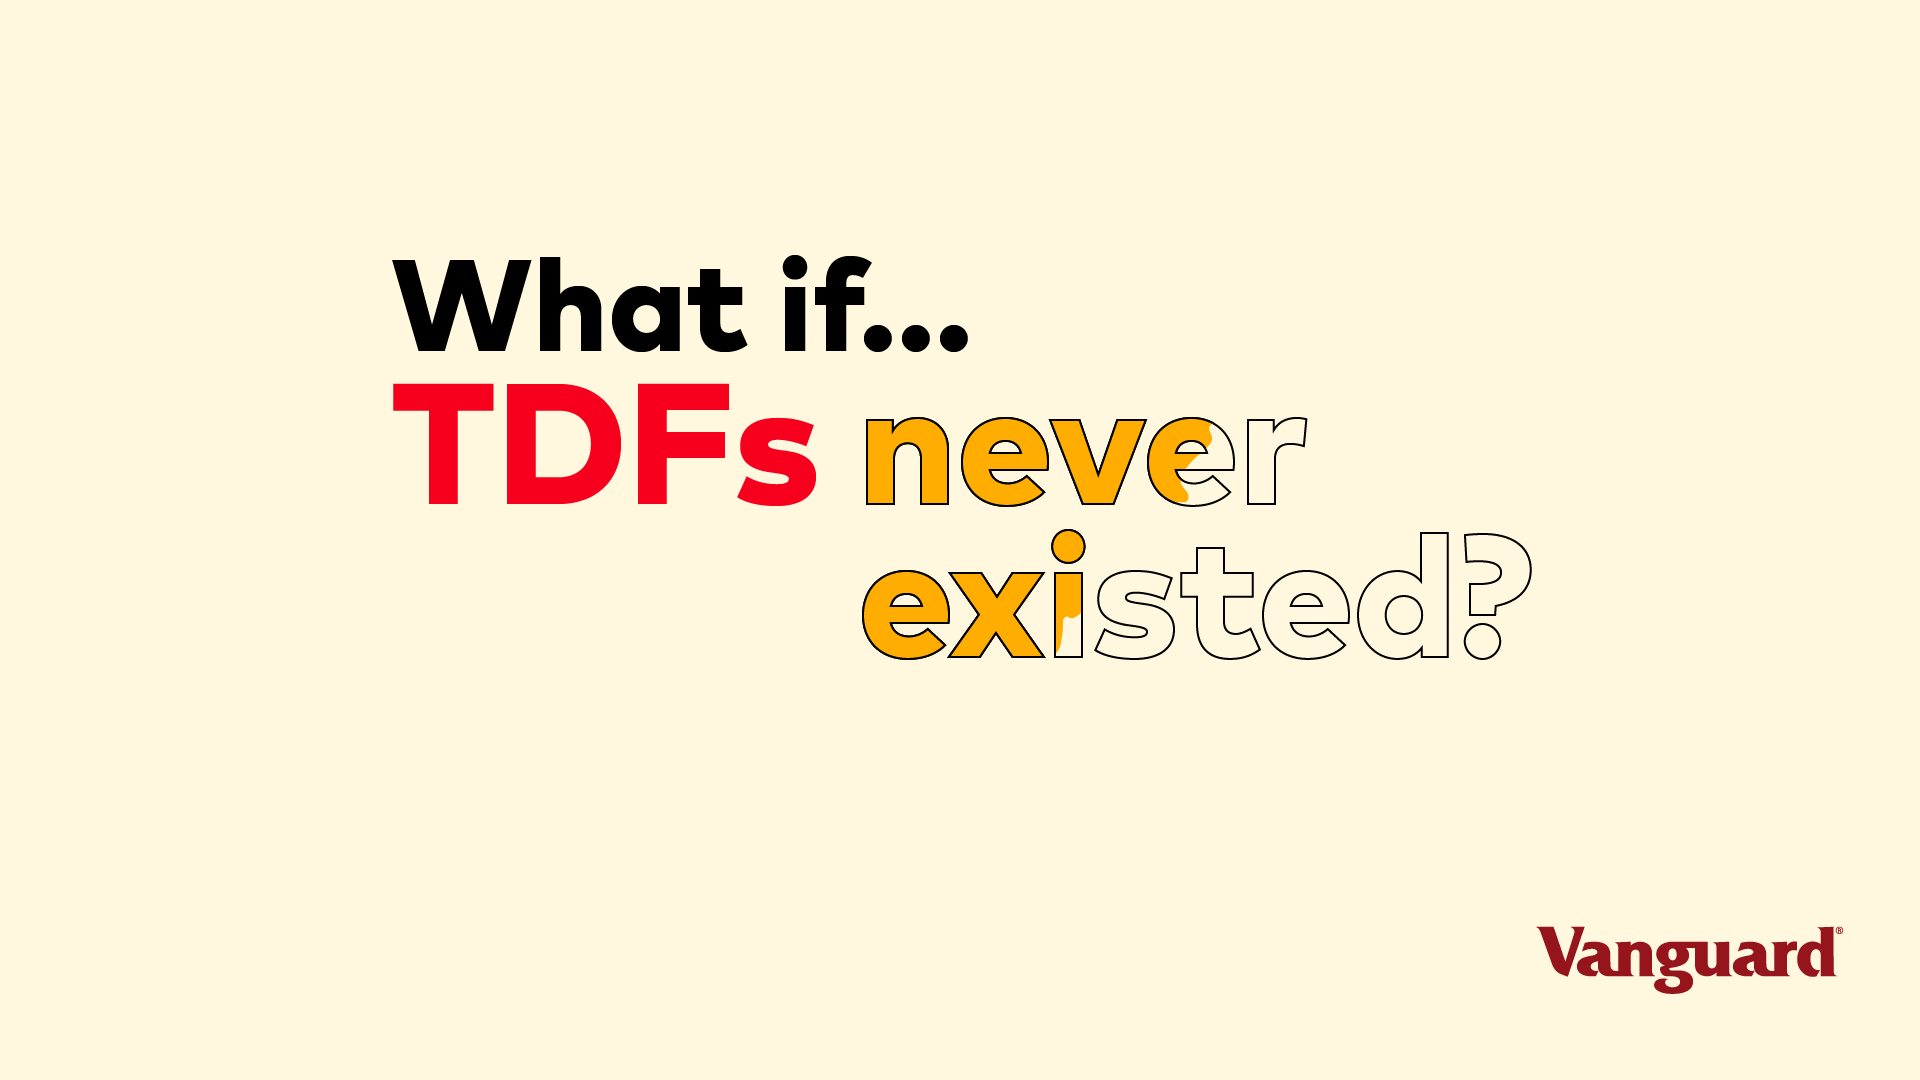 What if TDFs never existed video